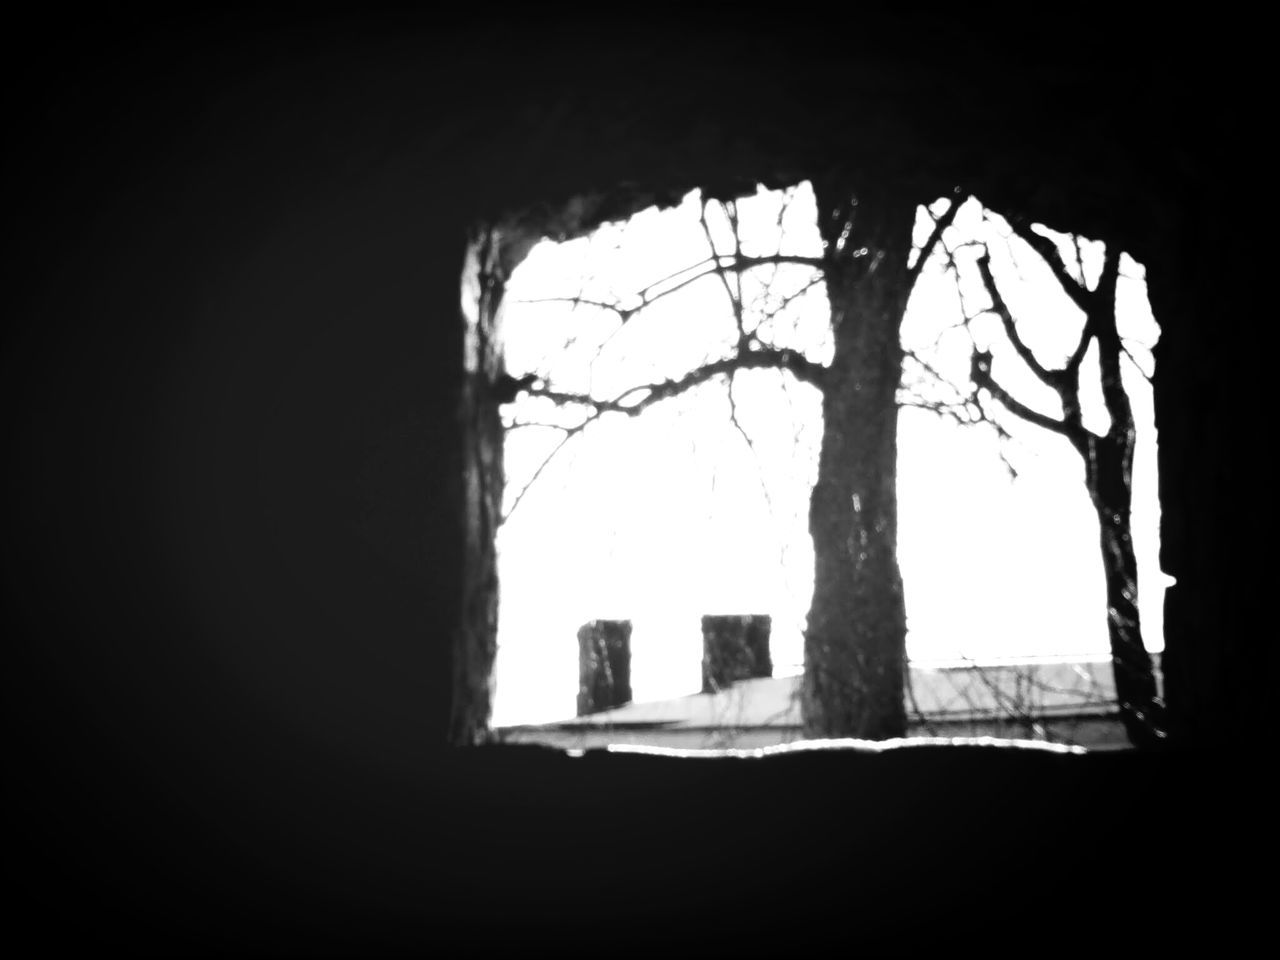 indoors, window, architecture, built structure, tree, silhouette, house, wall - building feature, dark, wall, day, building exterior, no people, sunlight, abandoned, arch, clear sky, old, branch, tree trunk